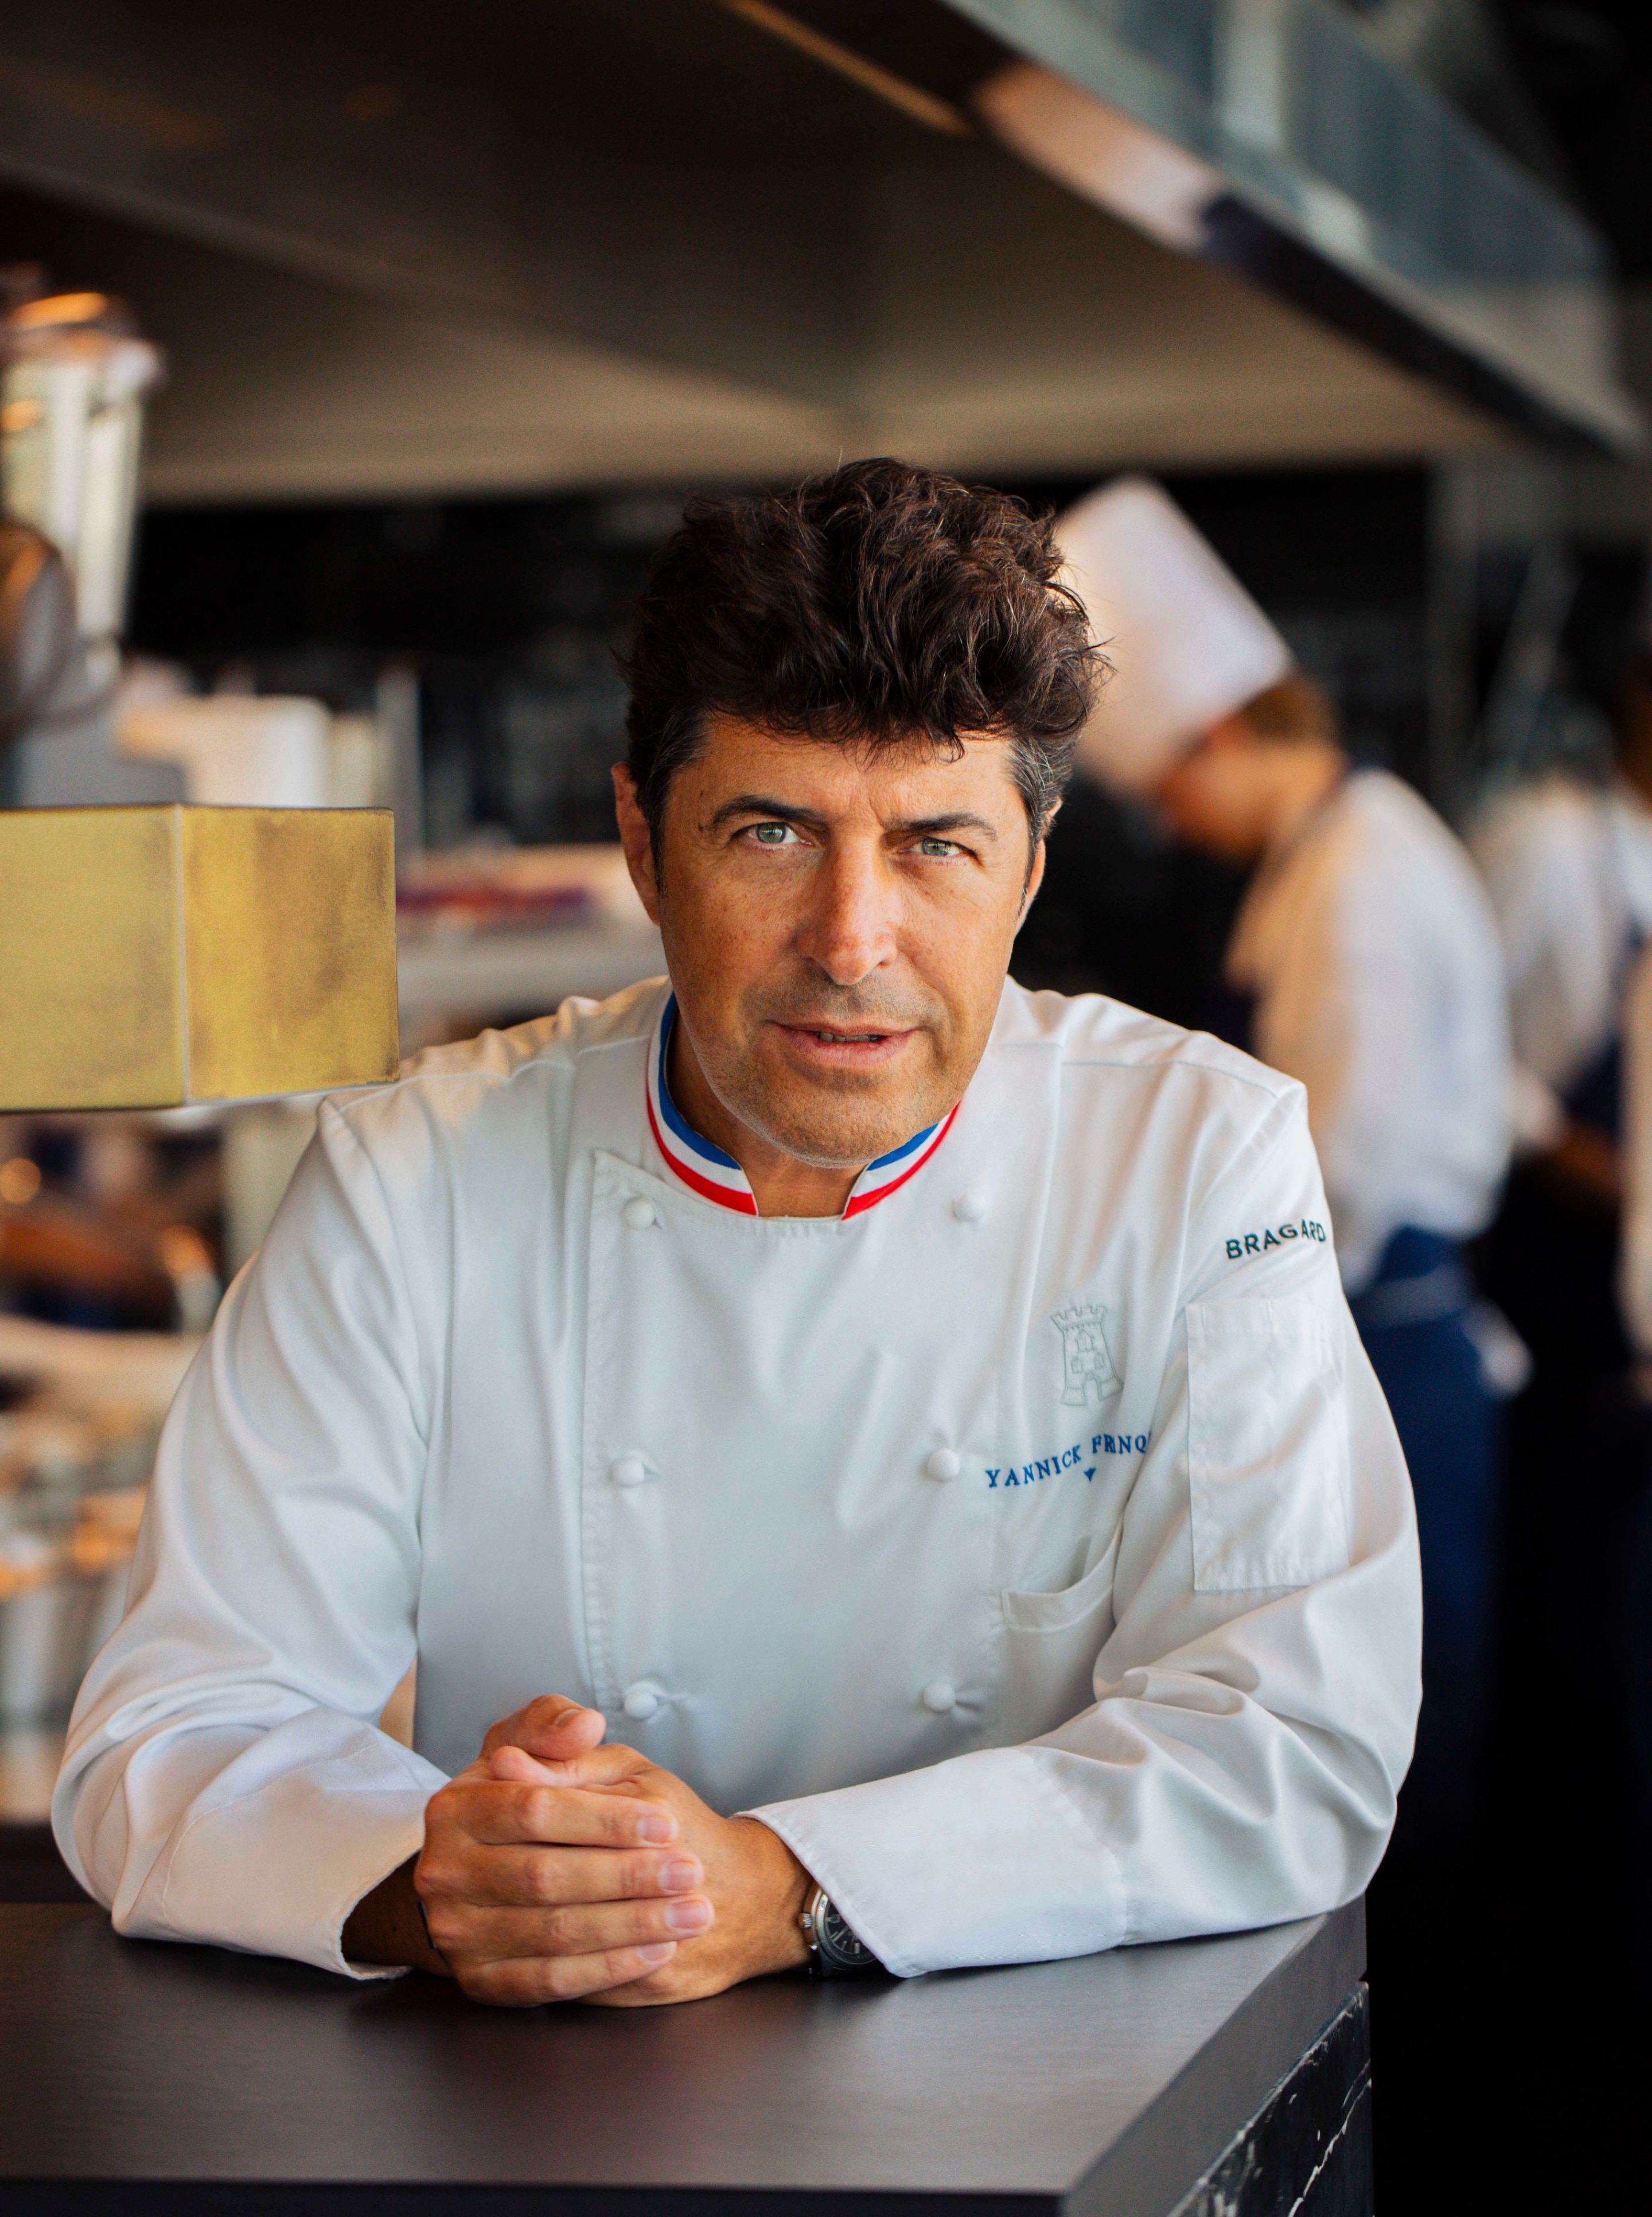 Chef Yannick Franques, one of France's Best Craftsmen in 2004